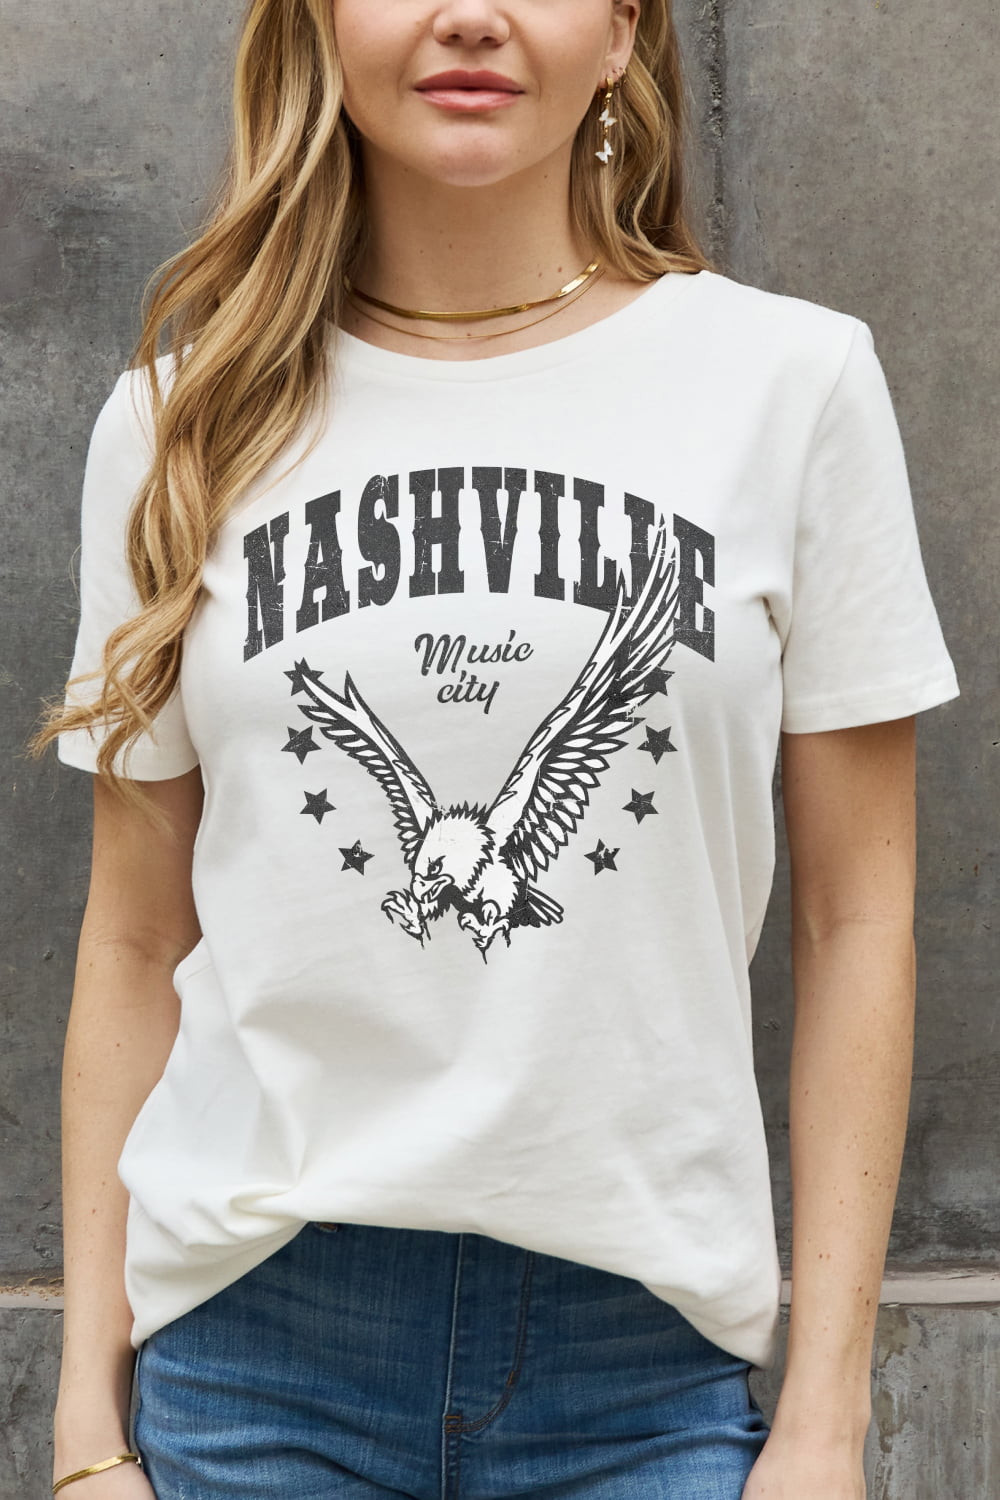 Simply Love Full Size NASHVILLE MUSIC CITY Graphic Cotton Tee